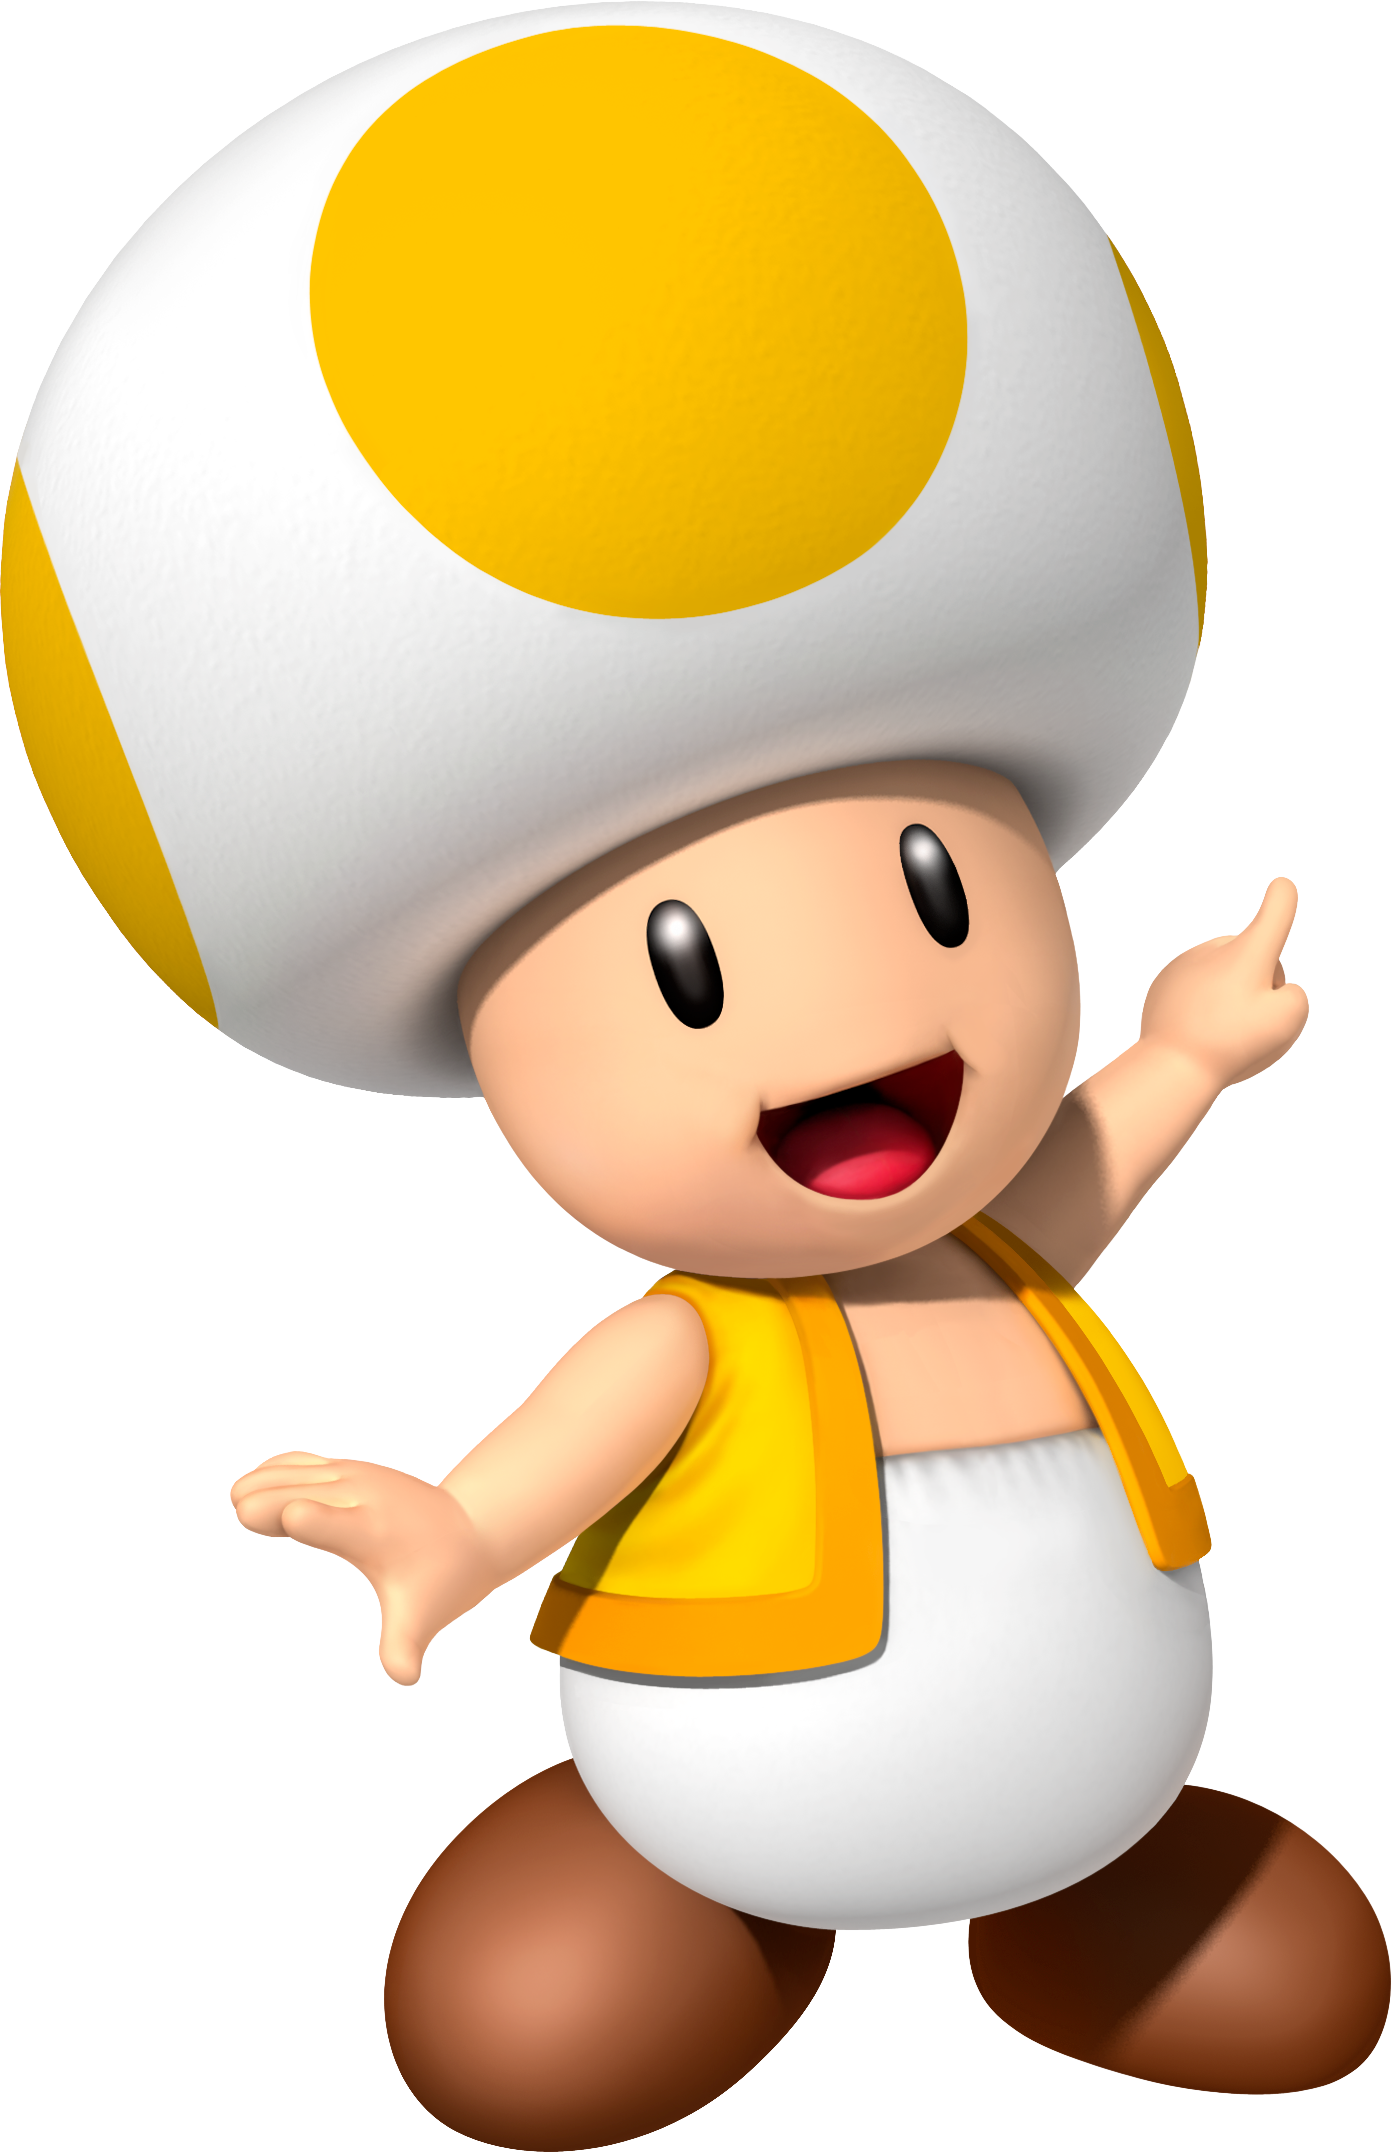 Toad Jaune Personnage Wiki Mario Fandom Powered By Wikia 8690